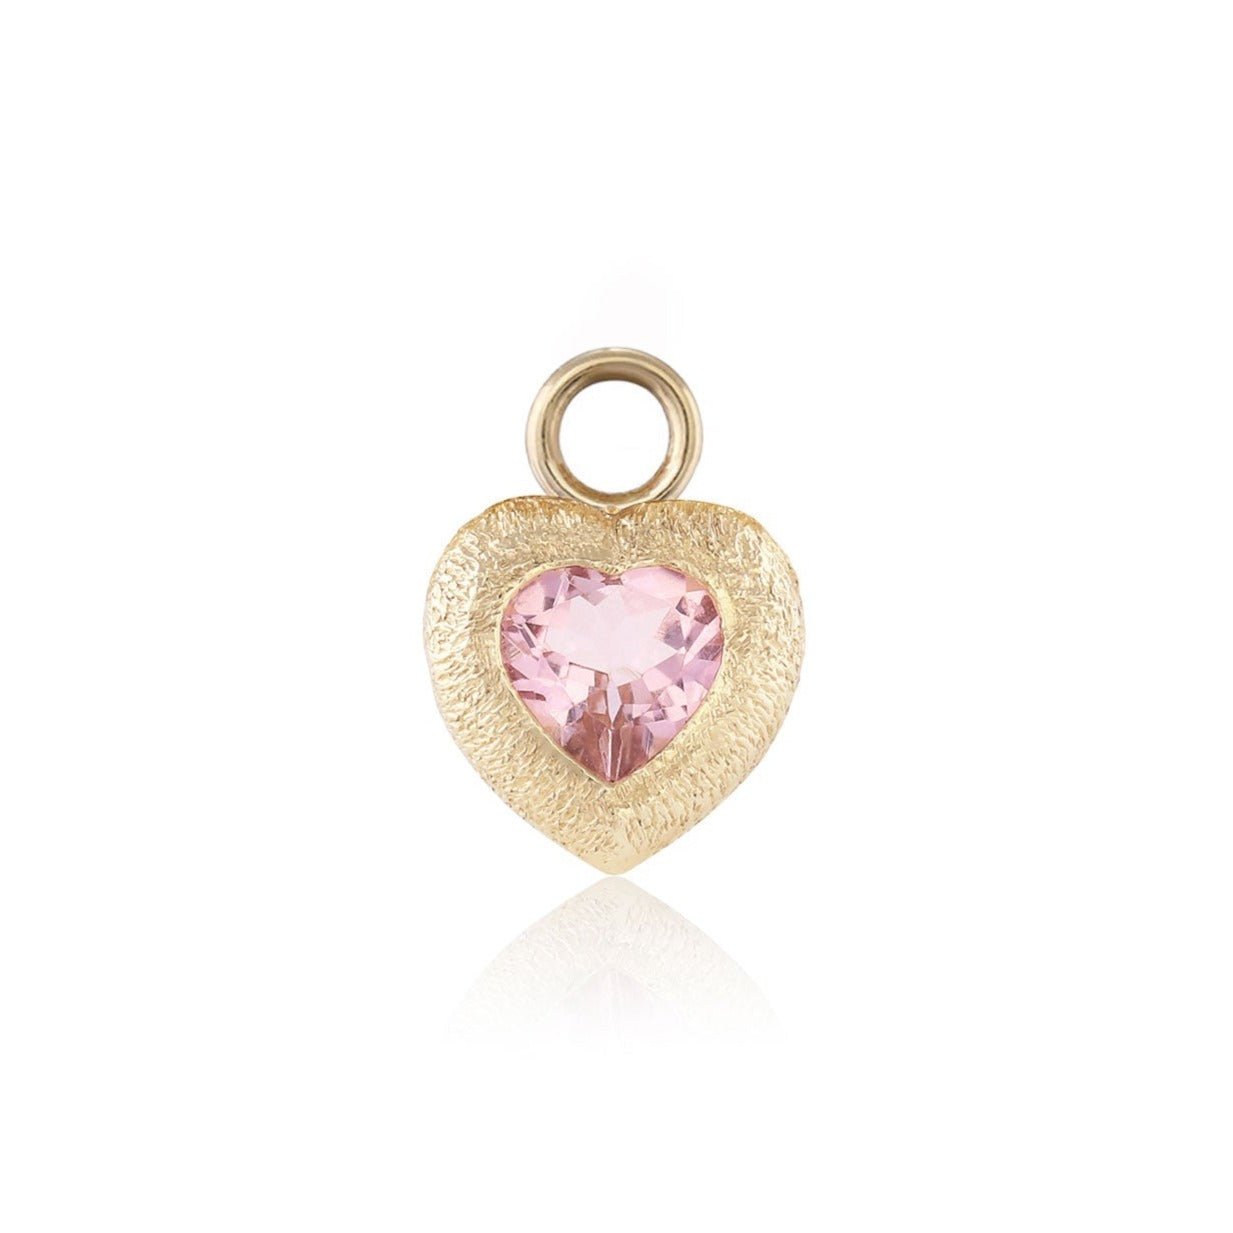 Melly Pink or Green Tourmaline Heart Charm